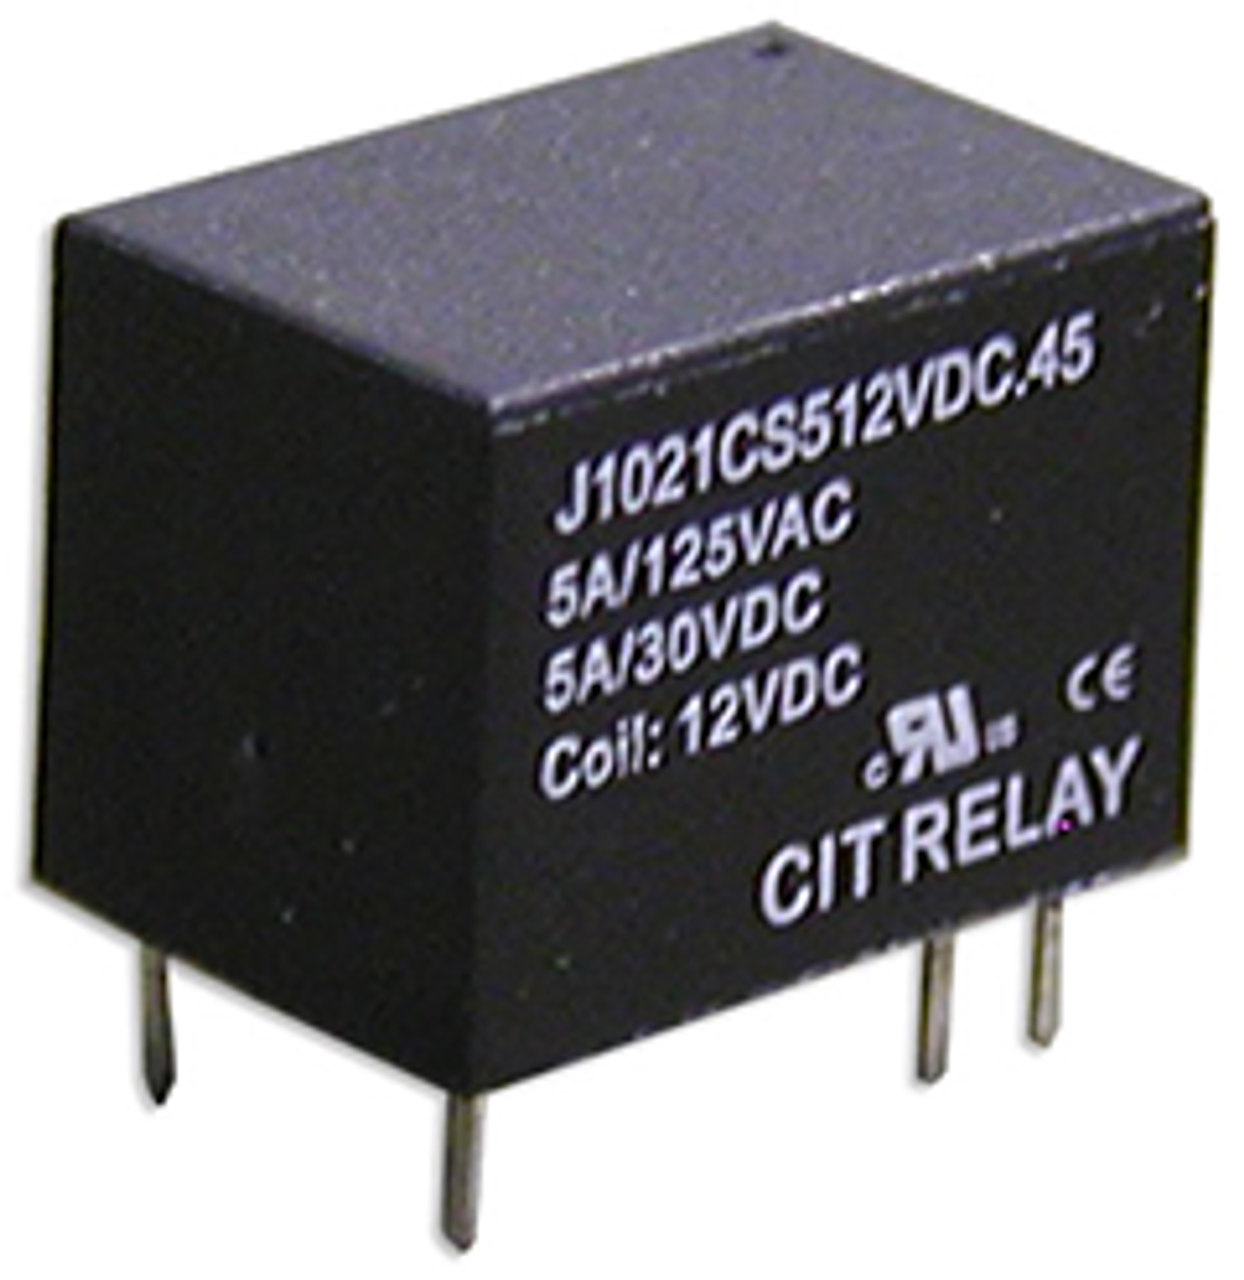 CIT Relay and Switch J1021AS324VDC.45 Power Relays